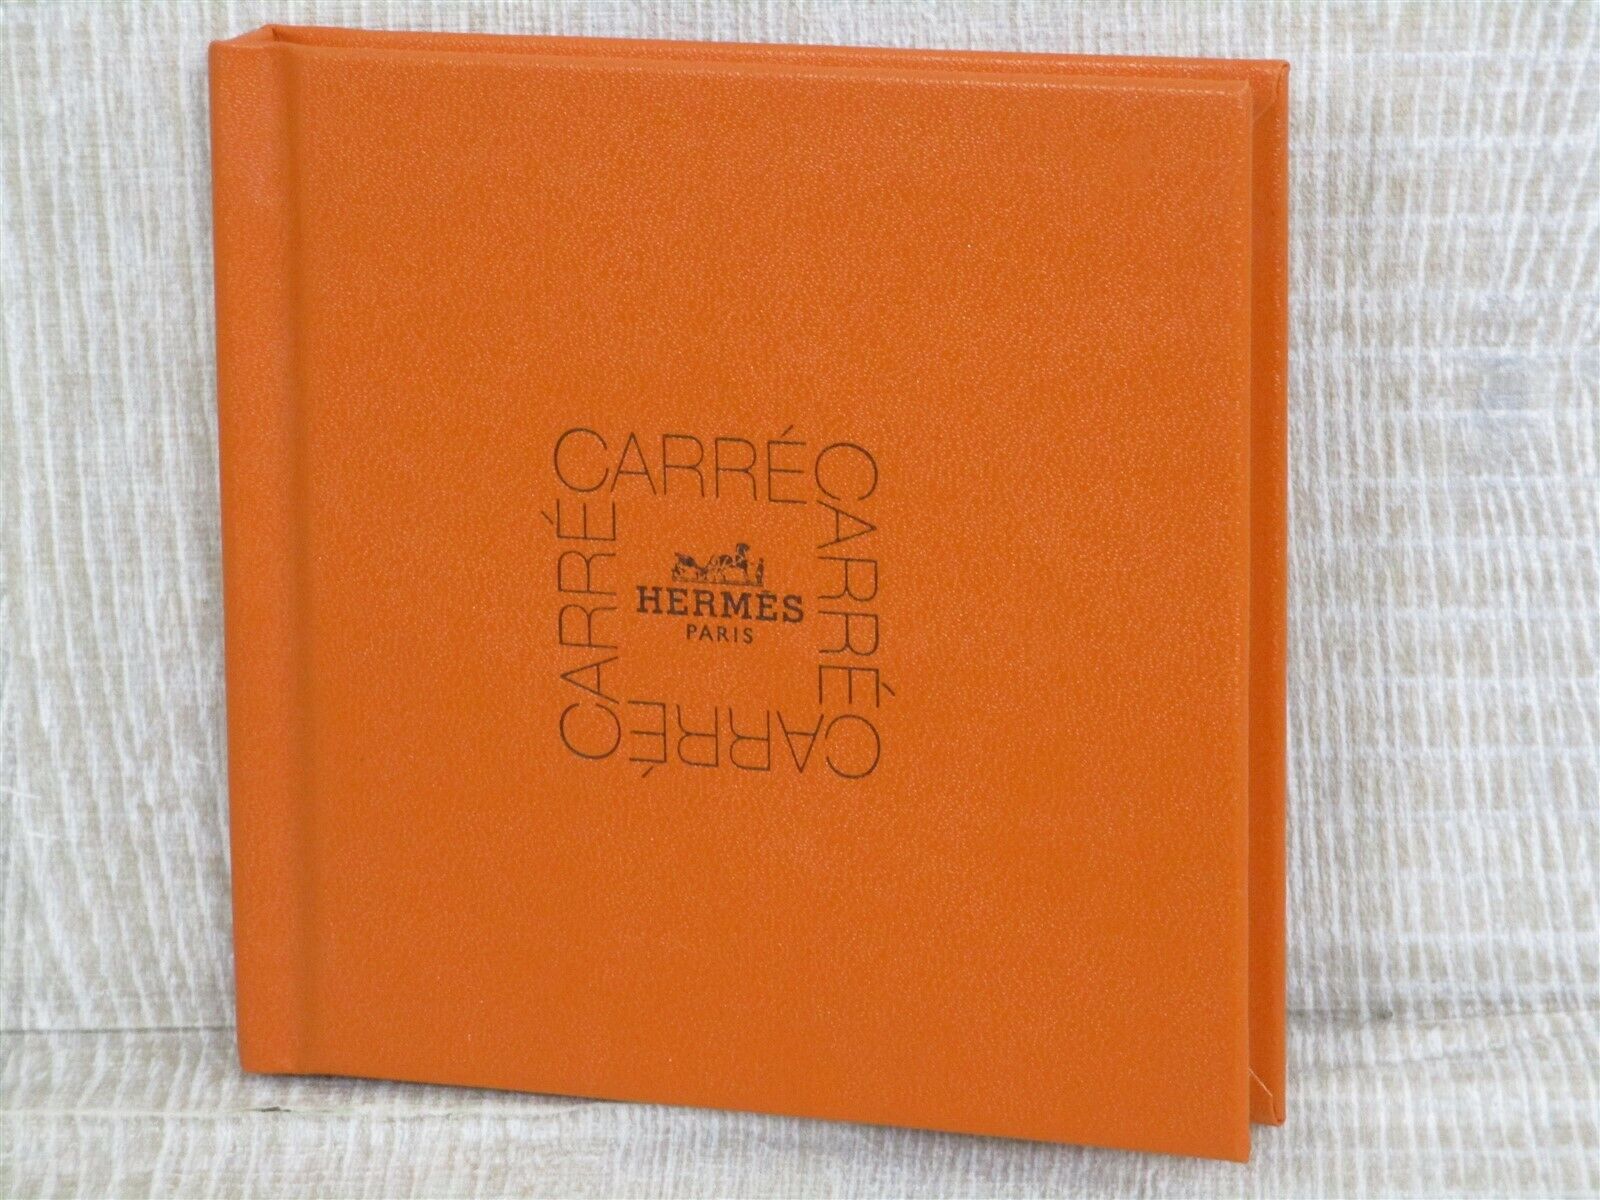 HERMES CARRE Express Yourself with Your Hermes Scarf Art Photo Fan 1998 Ltd Book